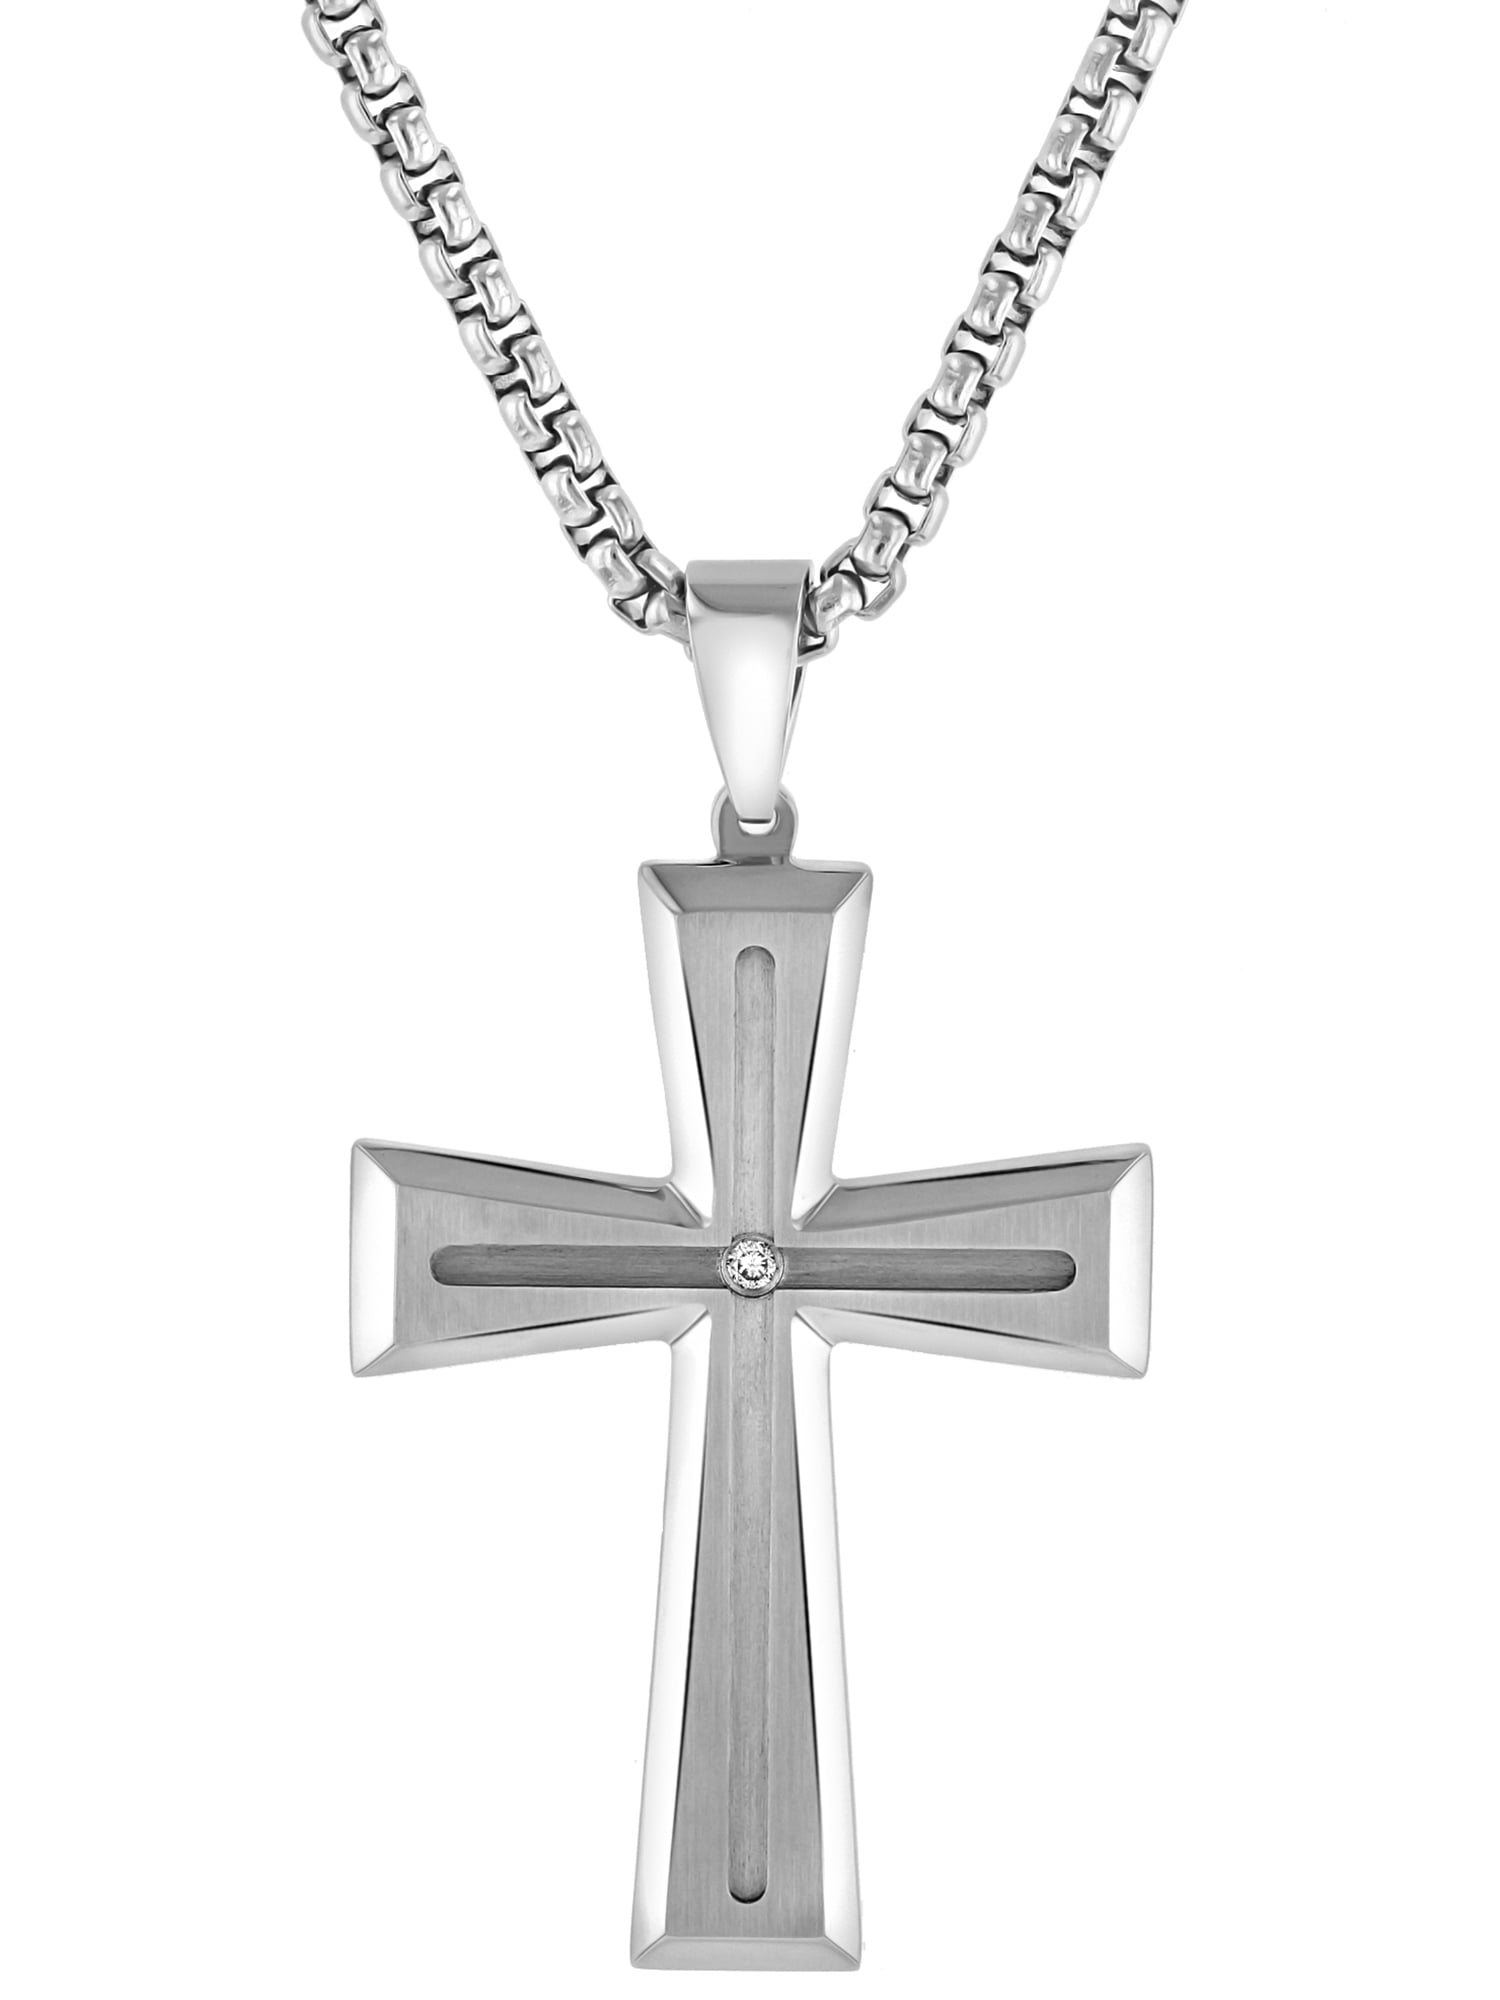 Mens Diamond Accent Stainless Steel Cross Pendant Necklace